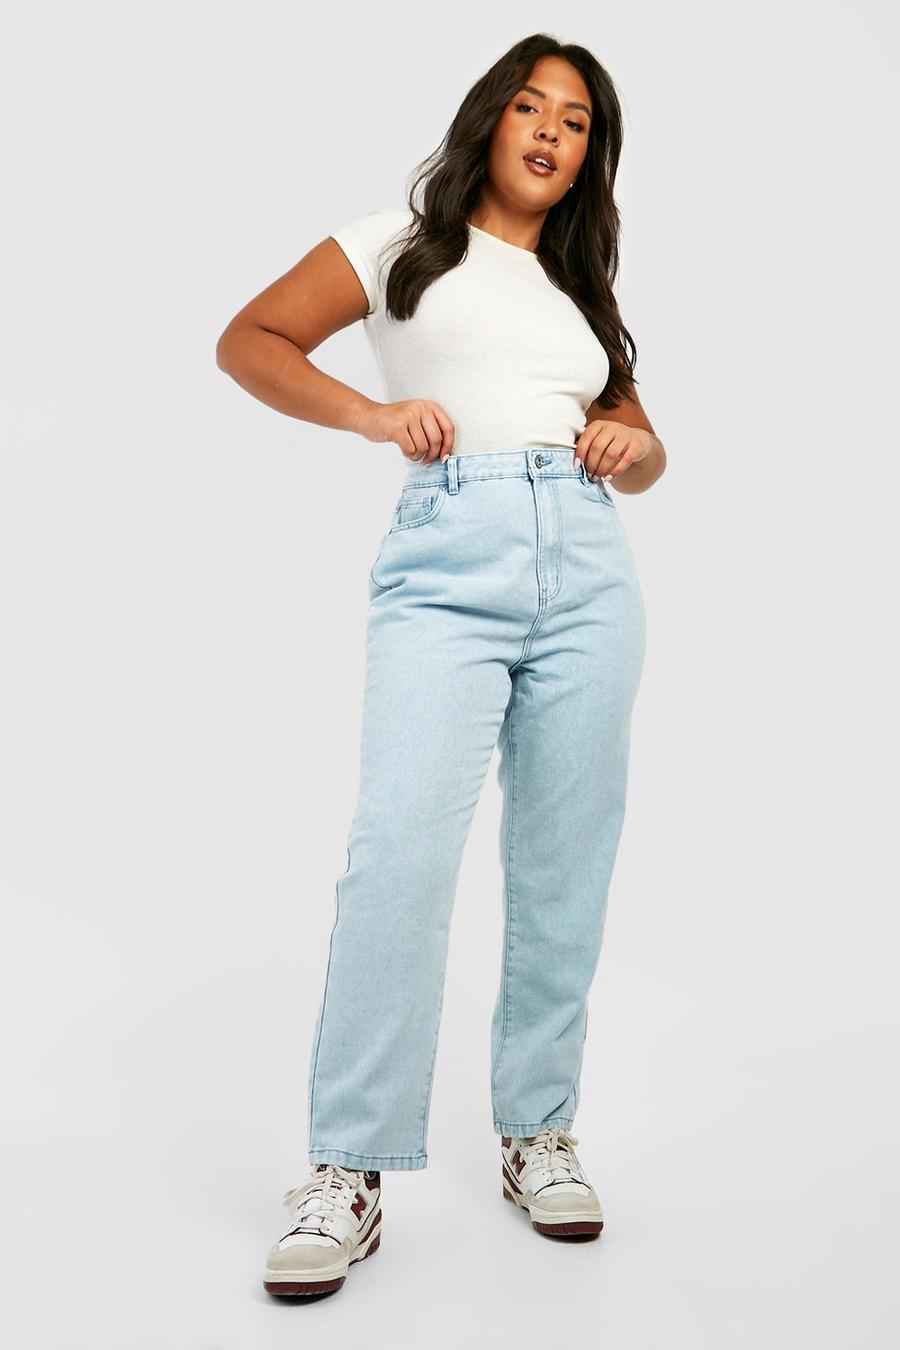 Plus Size High Waisted Denim Mom Jeans